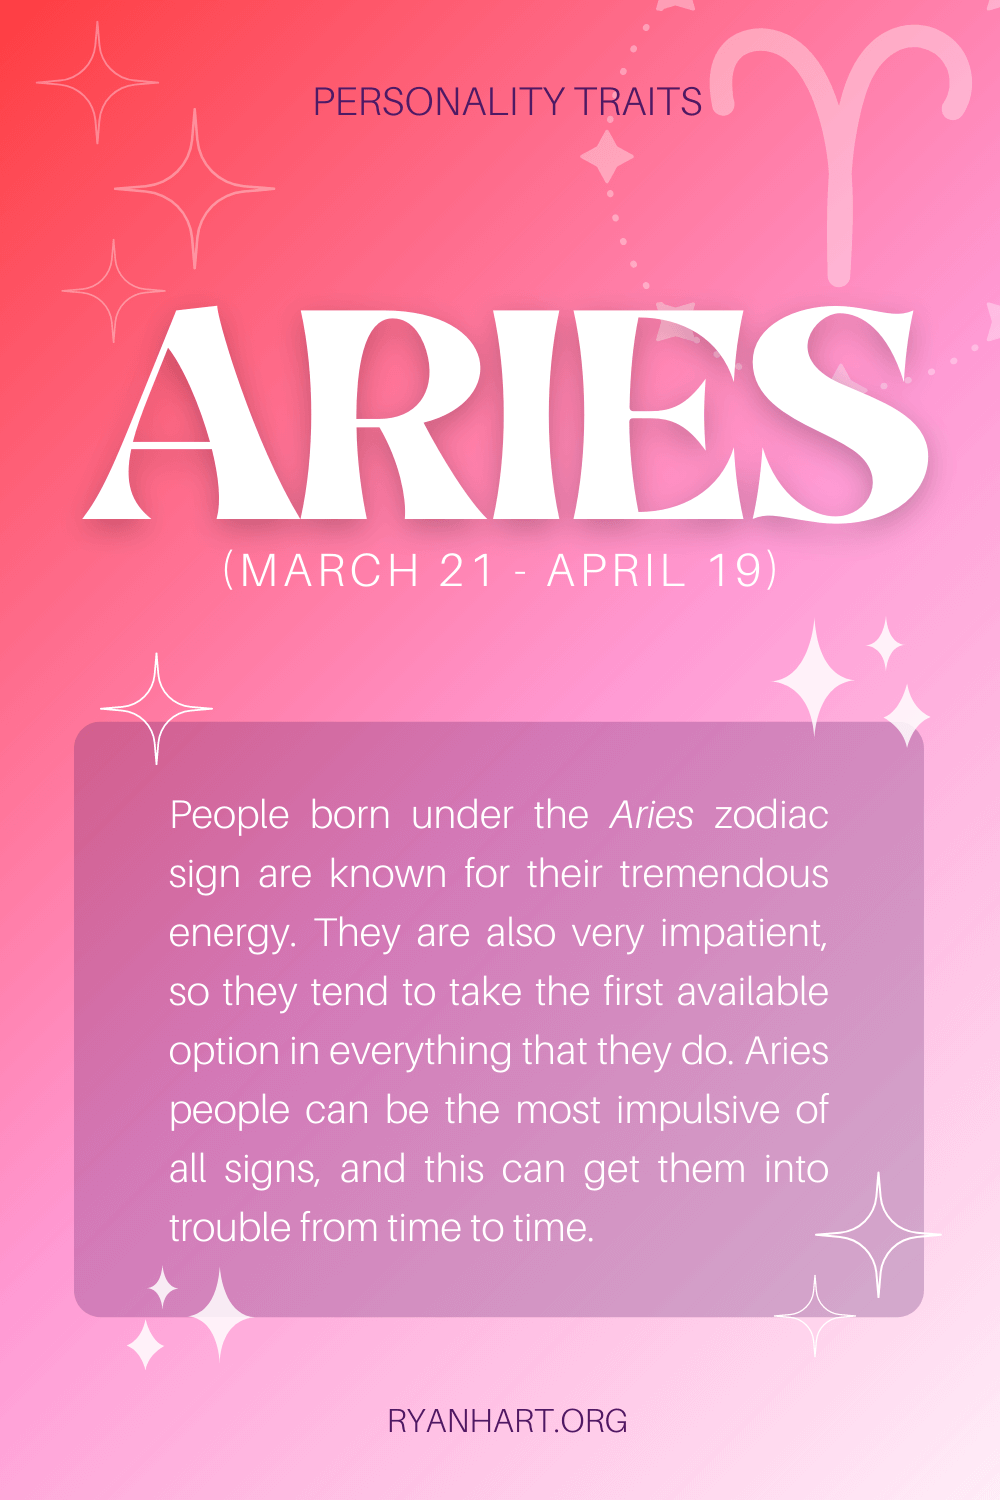 List of Aries Personality Traits